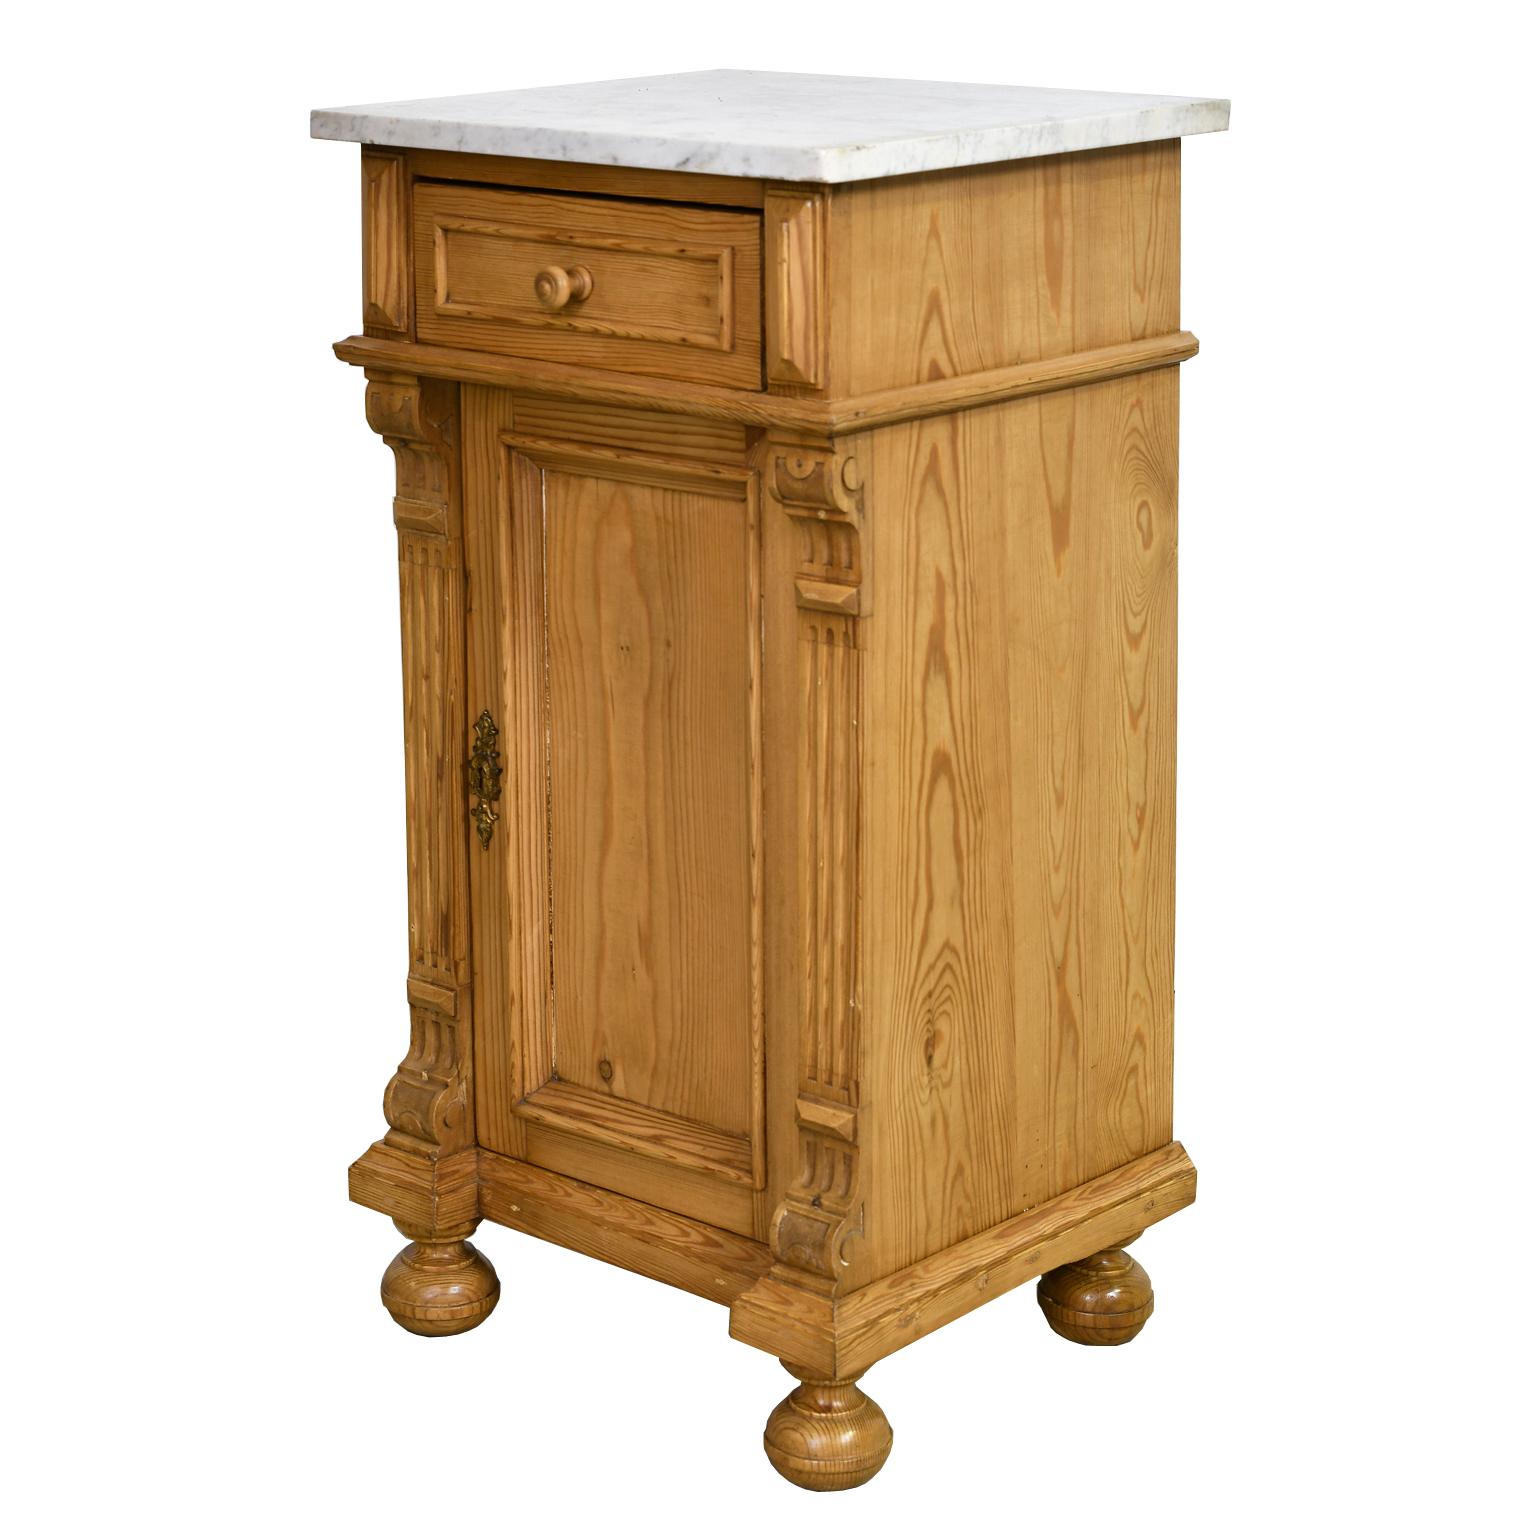 A lovely Gründerzeit pot cupboard or nightstand in pine with white Carrara-marble top, with one drawer over a lower cabinet that offers one interior shelf. Features decorative moldings around recessed panels on drawer and door, with fluting along